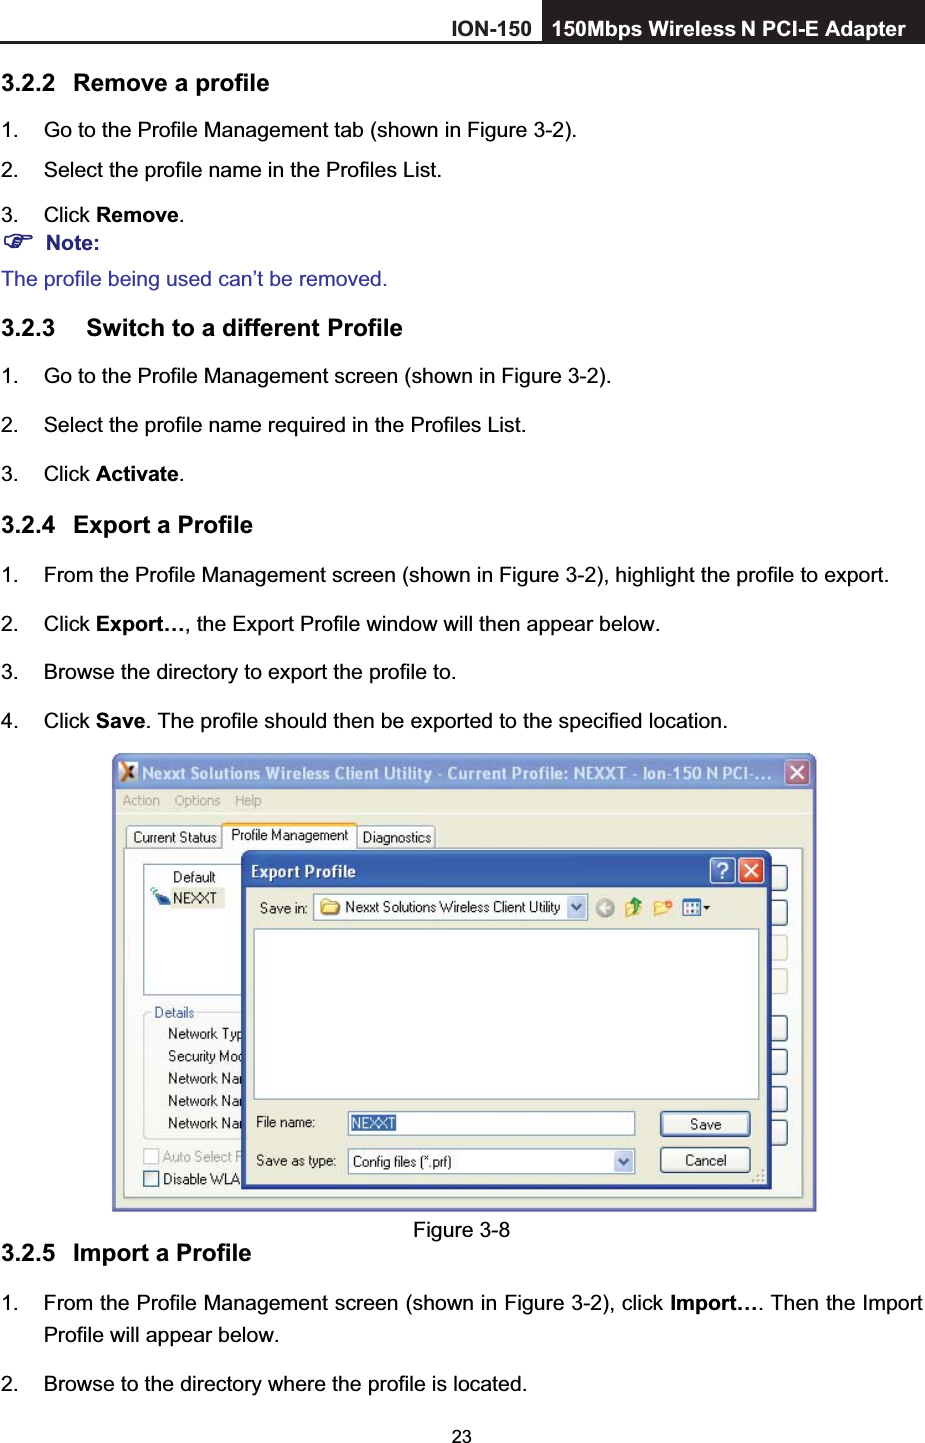 233.2.2 Remove a profile 1.  Go to the Profile Management tab (shown in Figure 3-2).2.  Select the profile name in the Profiles List. 3. Click Remove.Note:The profile being used can’t be removed. 3.2.3 Switch to a different Profile 1.  Go to the Profile Management screen (shown in Figure 3-2).2.  Select the profile name required in the Profiles List. 3. Click Activate.3.2.4 Export a Profile 1.  From the Profile Management screen (shown in Figure 3-2), highlight the profile to export. 2. Click Export…, the Export Profile window will then appear below. 3.  Browse the directory to export the profile to. 4. Click Save. The profile should then be exported to the specified location. Figure 3-8 3.2.5 Import a Profile 1.  From the Profile Management screen (shown in Figure 3-2), click Import…. Then the Import Profile will appear below. 2.  Browse to the directory where the profile is located. ION-150 150Mbps Wireless  N PCI-E Adapter